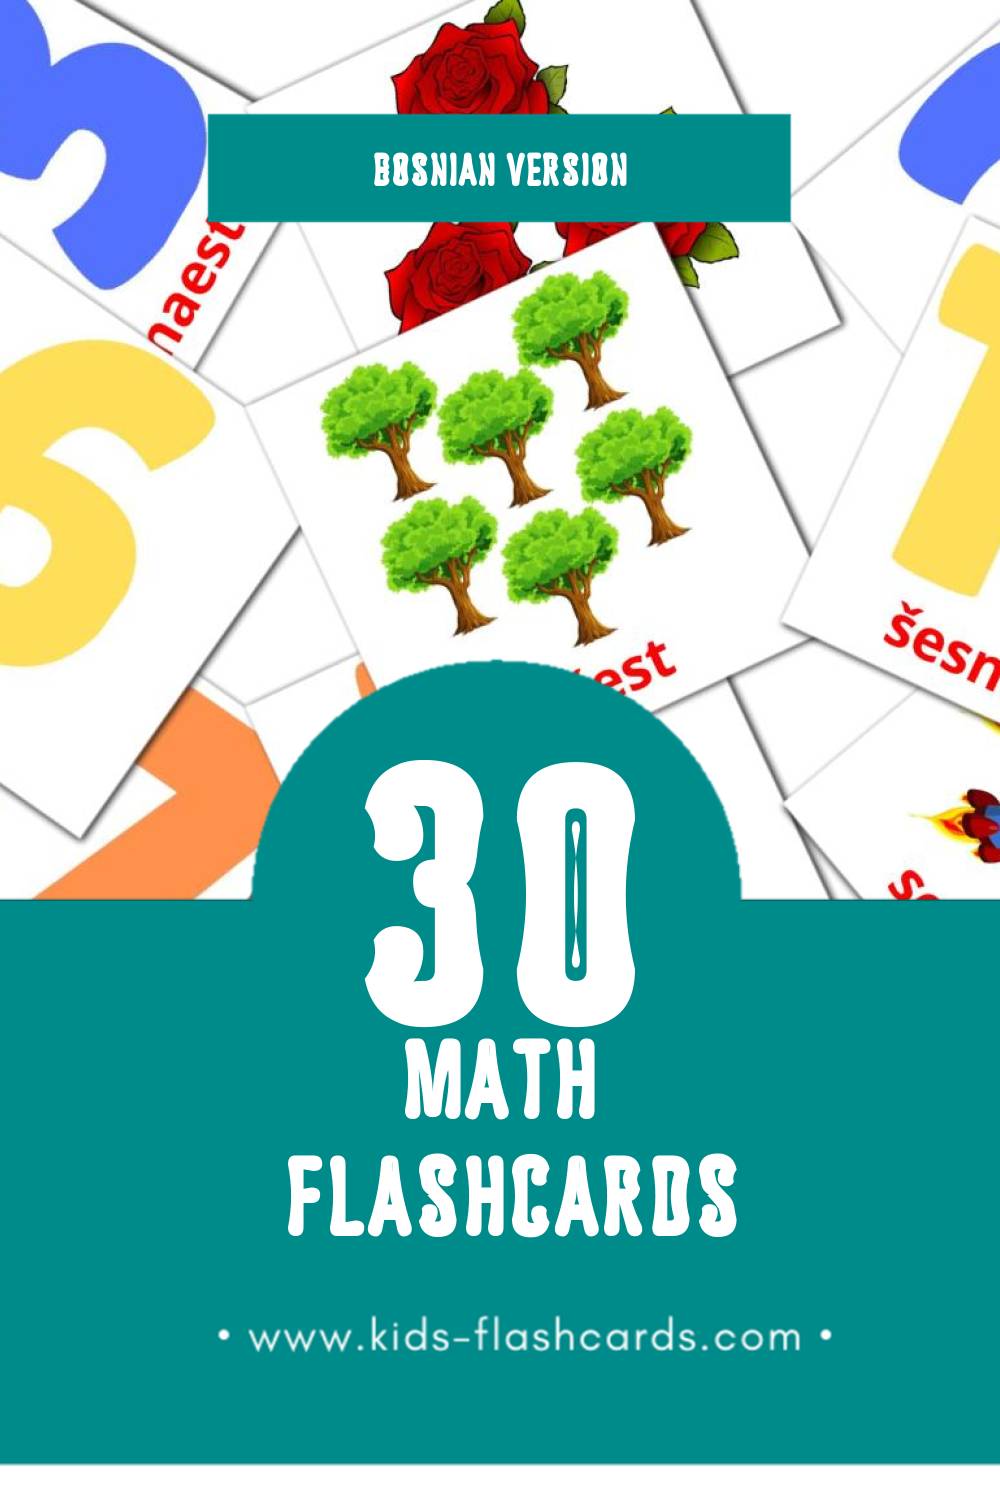 Visual Maths Flashcards for Toddlers (20 cards in Bosnian)